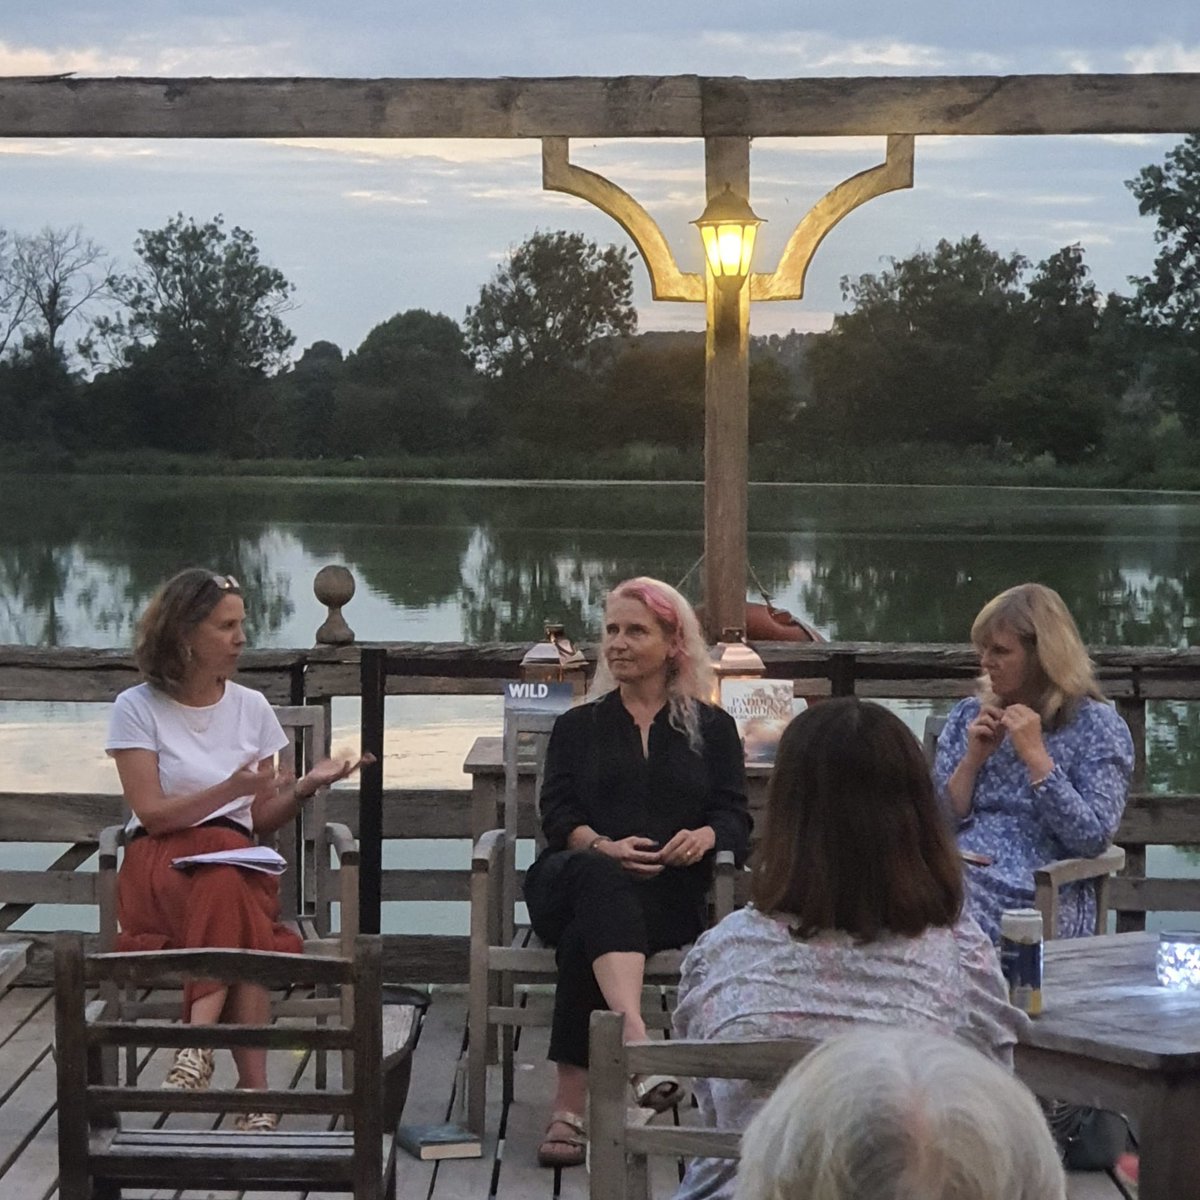 Thank you to everyone who came to @CastleHowardEst yesterday evening for Women’s Words on Water with myself, @AmyJaneBeer & @Healthyhappy50 and a special thank you to @BooksKemps for organising it. A magical evening celebrating water in the most perfect setting by the Great Lake.